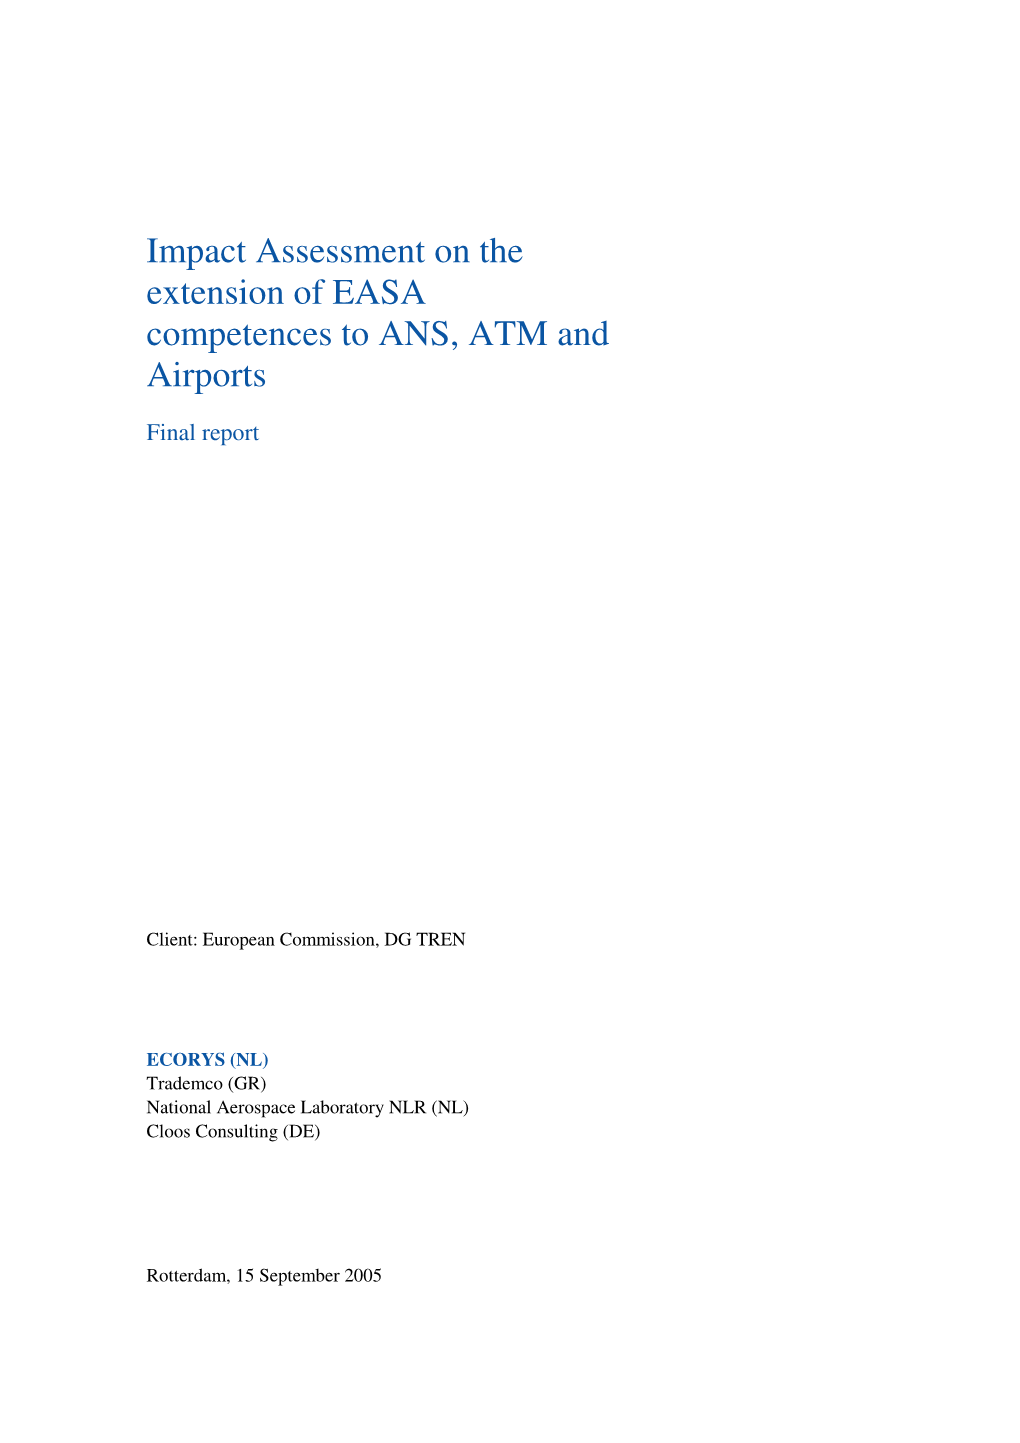 Impact Assessment on the Extension of EASA Competences to ANS, ATM and Airports